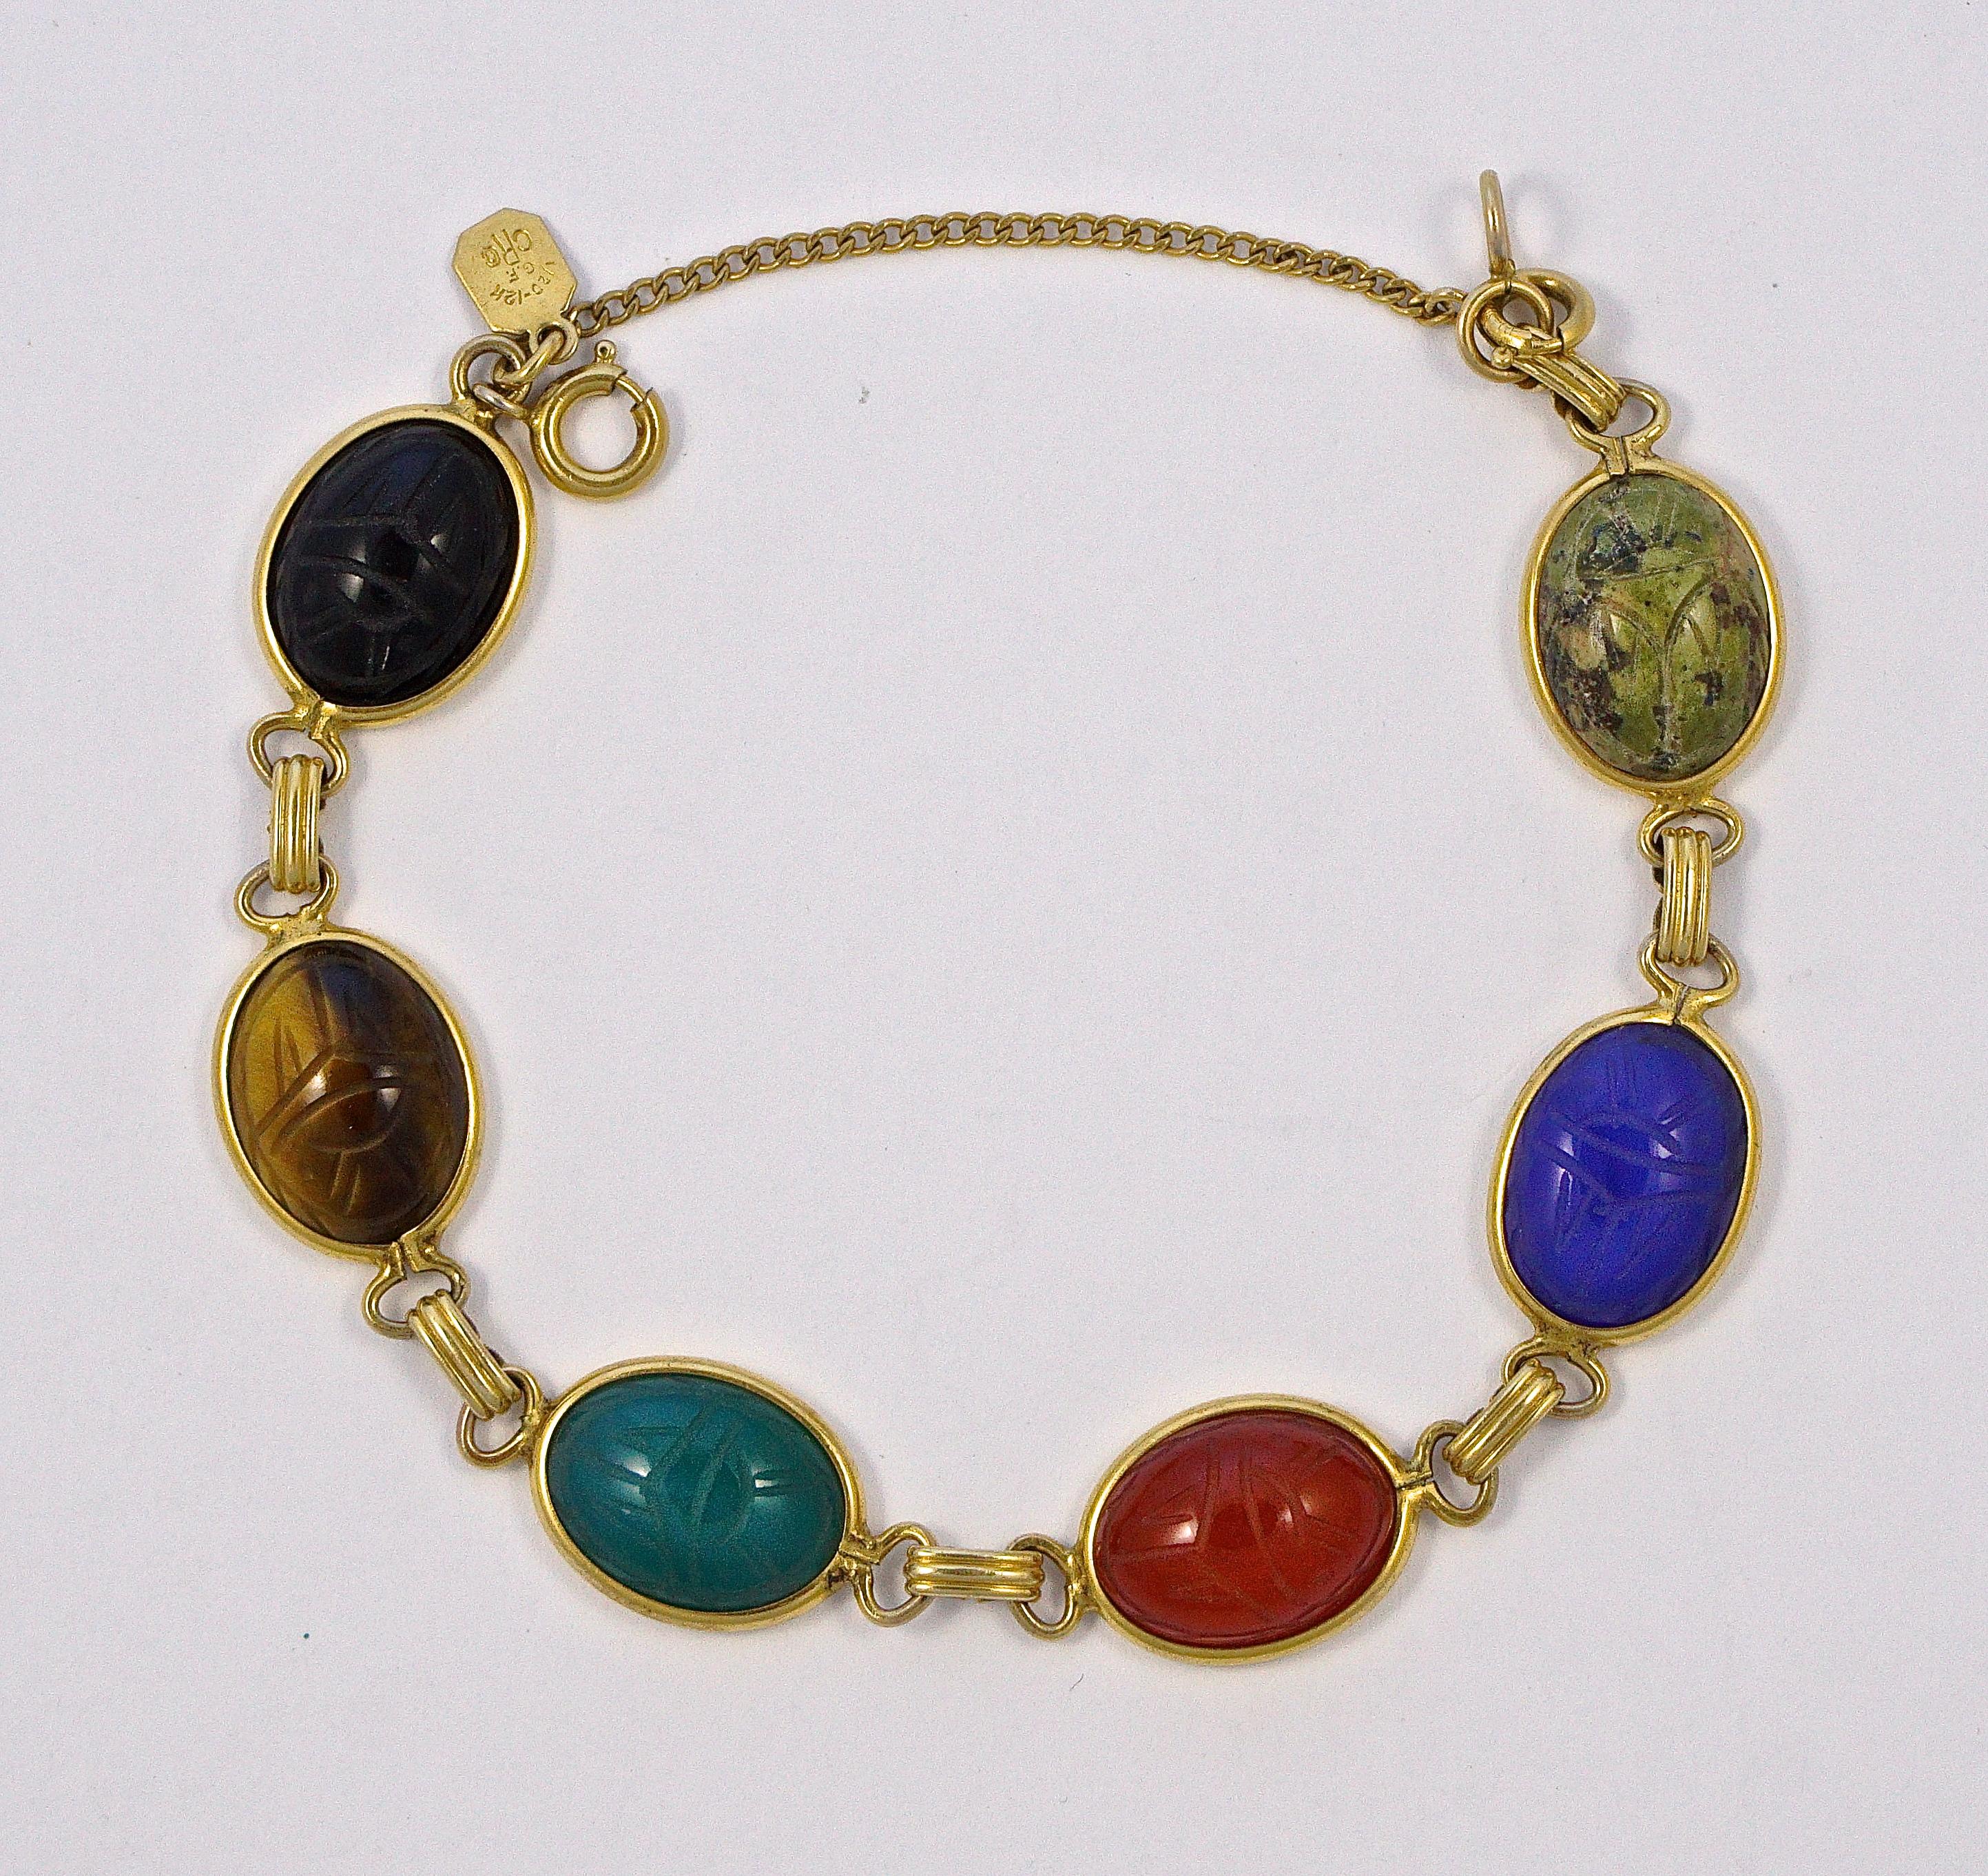 Charles Reis Company 12K gold filled vintage bracelet with a safety chain, featuring engraved scarabs on semi precious stones, including tiger eye, carnelian and black onyx. Length 19.5cm / 7.68 inches by width 1.3cm / .5 inch. The bracelet is in